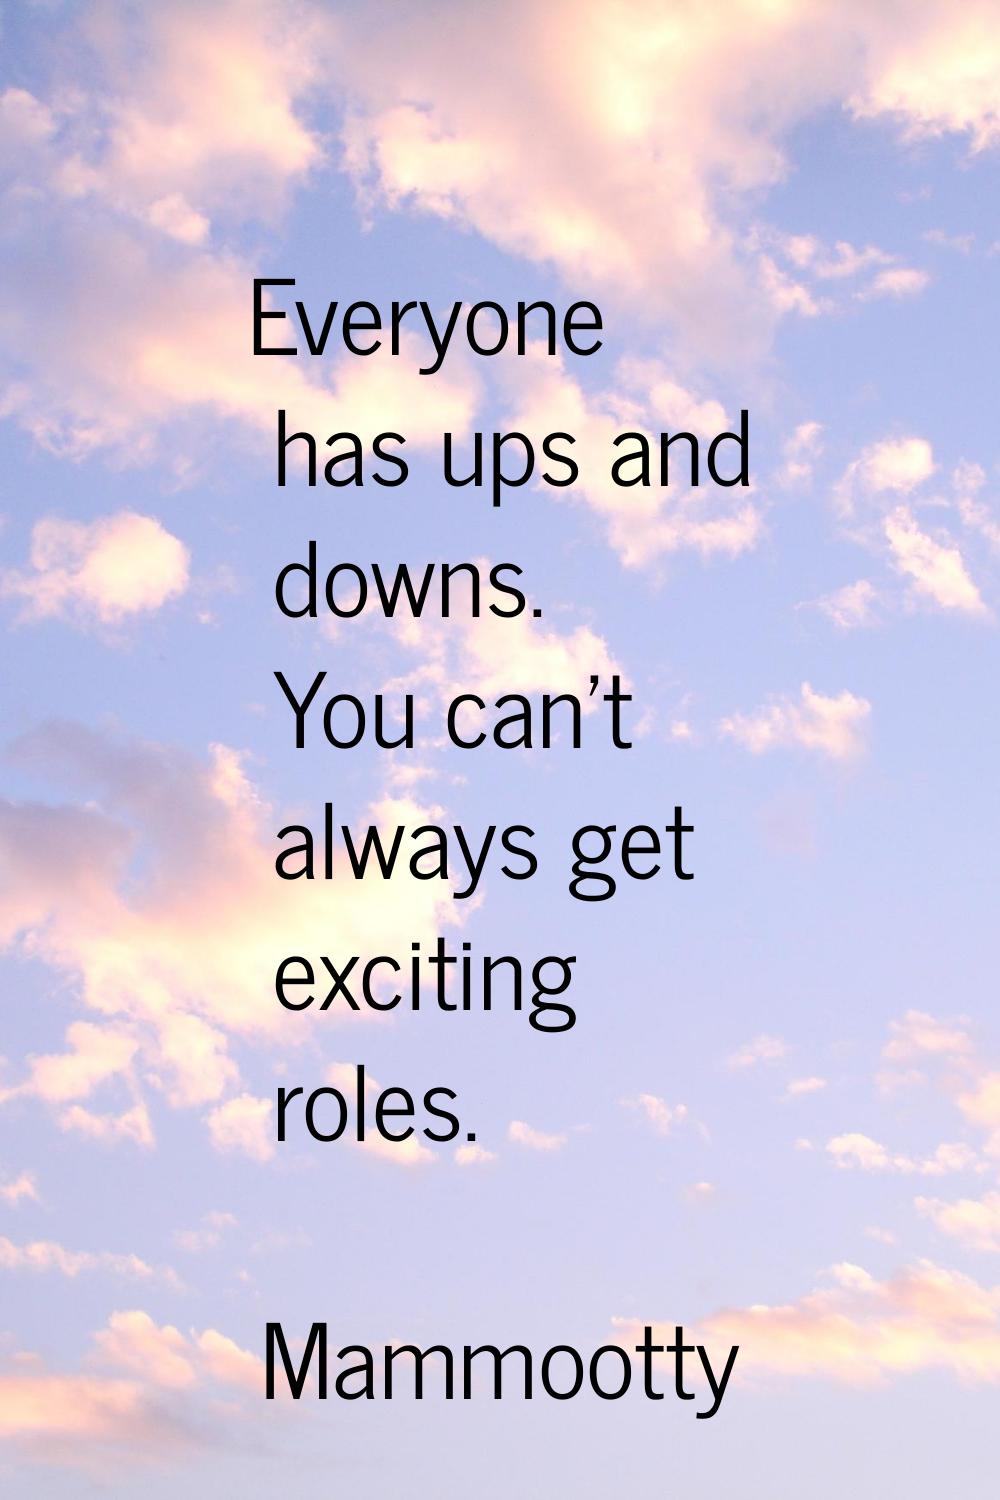 Everyone has ups and downs. You can't always get exciting roles.